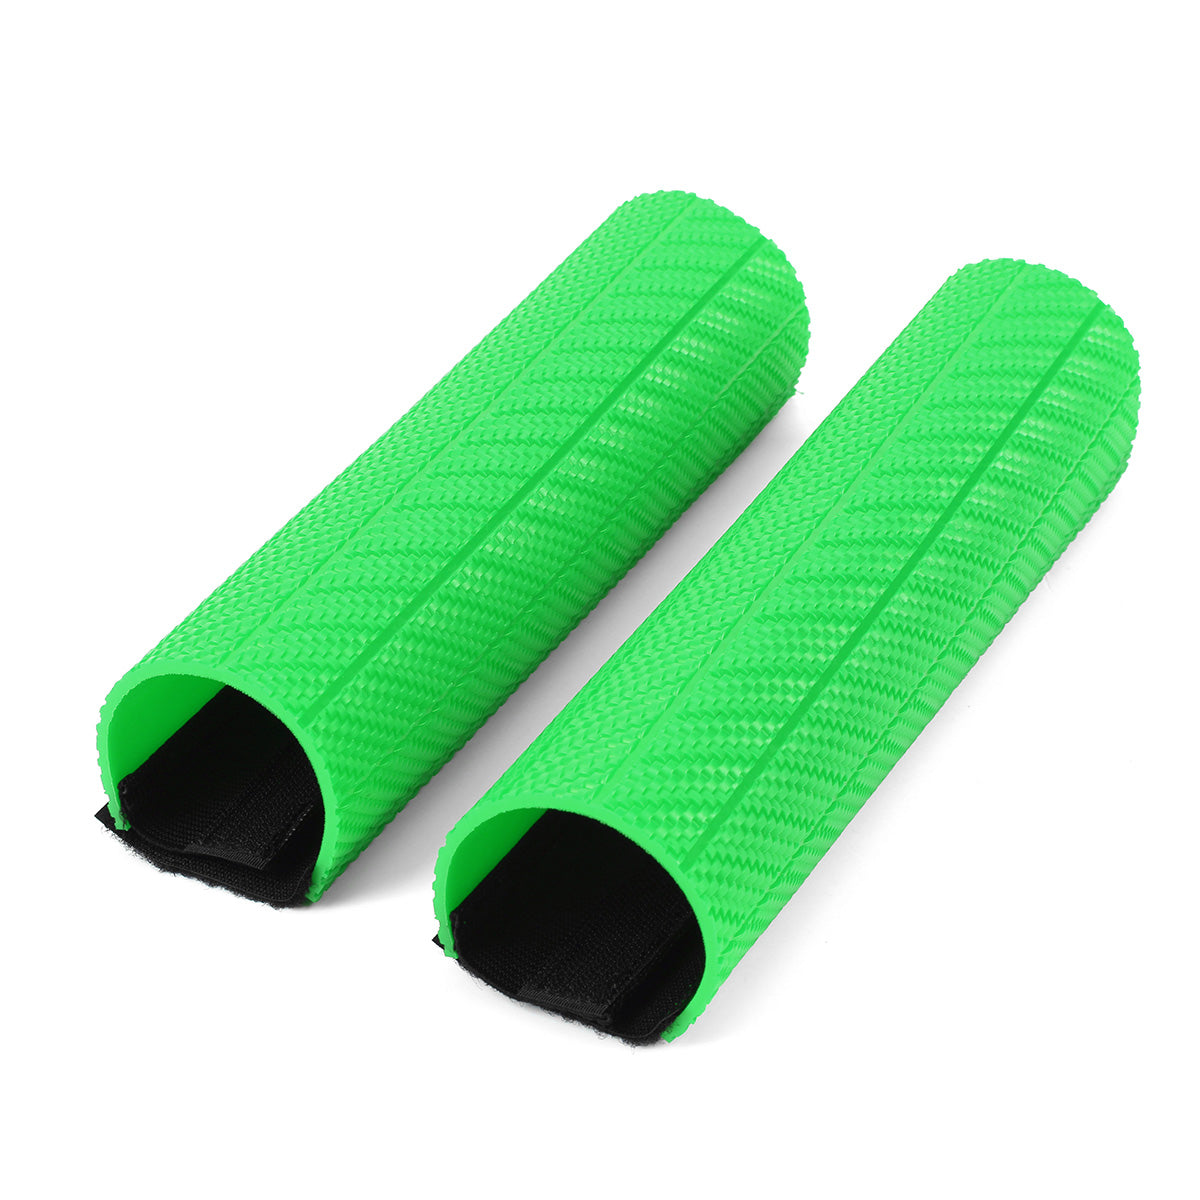 Medium Sea Green Motorcycle Front Fork Protector Shock Absorber Guard Wrap Cover Skin